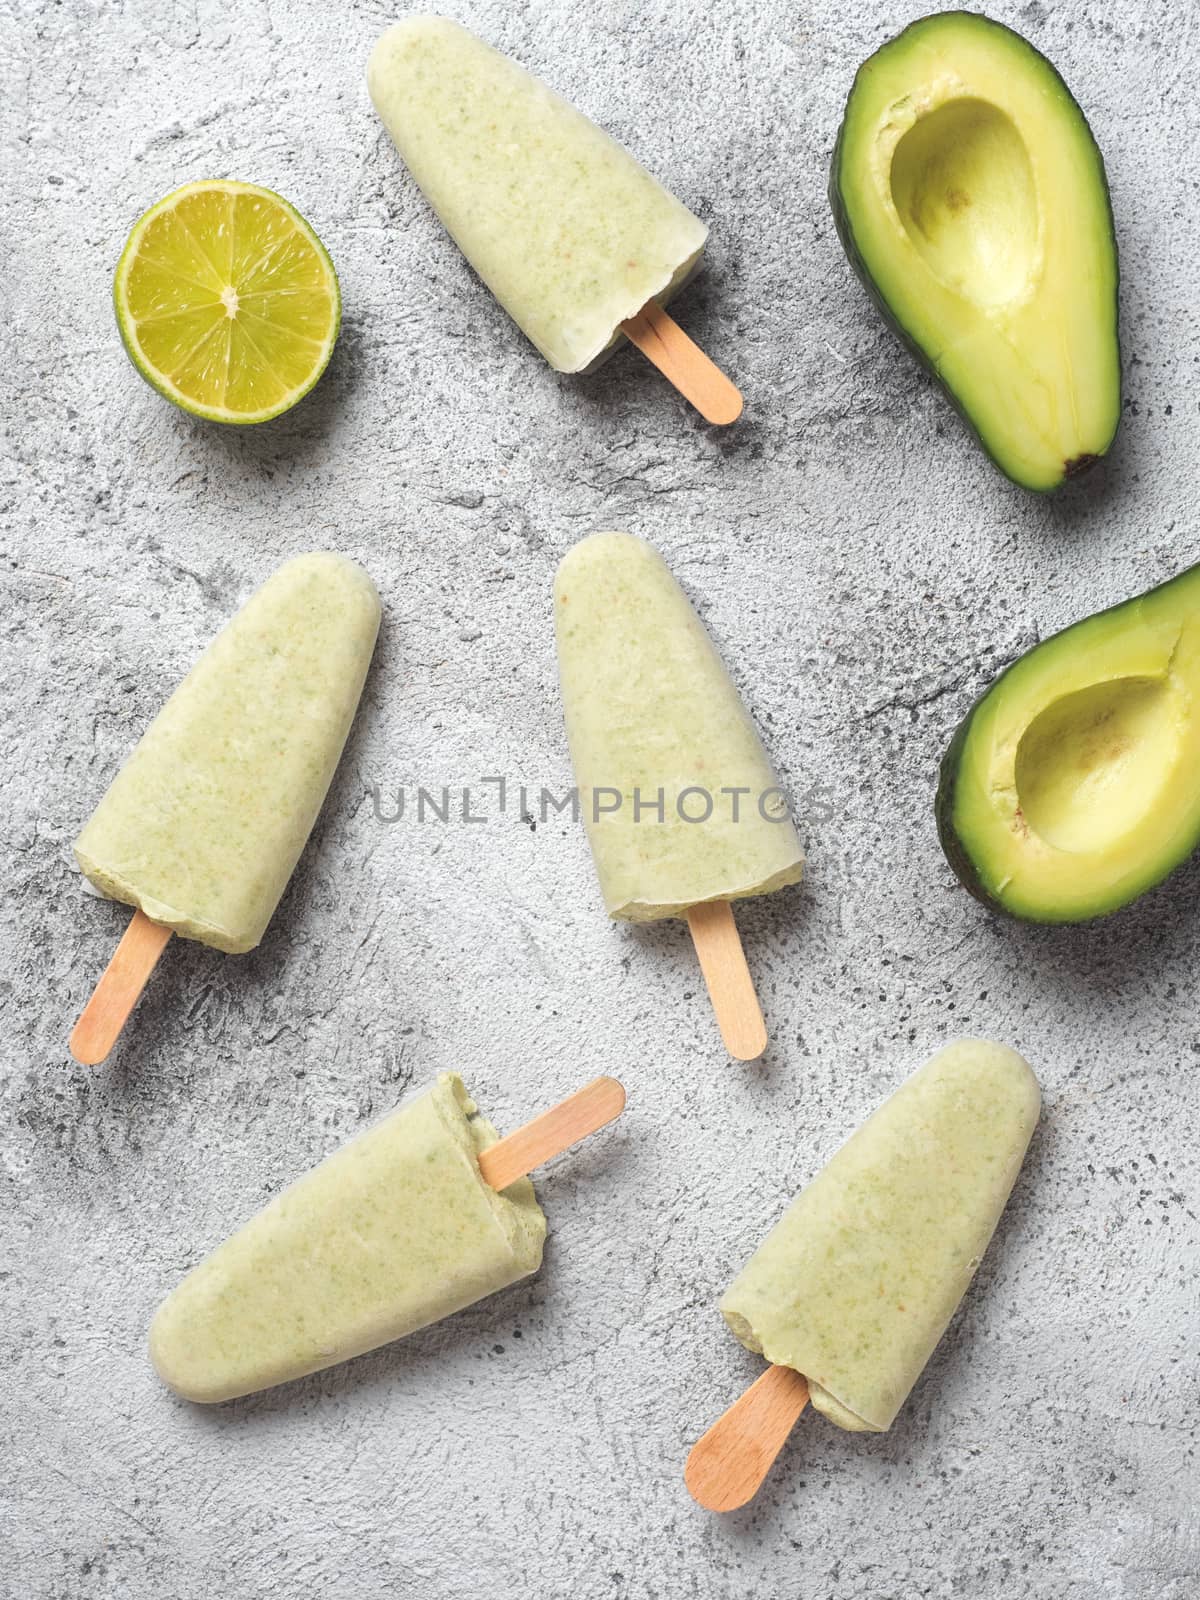 Homemade raw vegan avocado lime popsicle. Sugar-free, non-dairy green ice cream on gray background. Top view. Ideas and recipes for healthy snack, dessert or smoothie. Vertical.